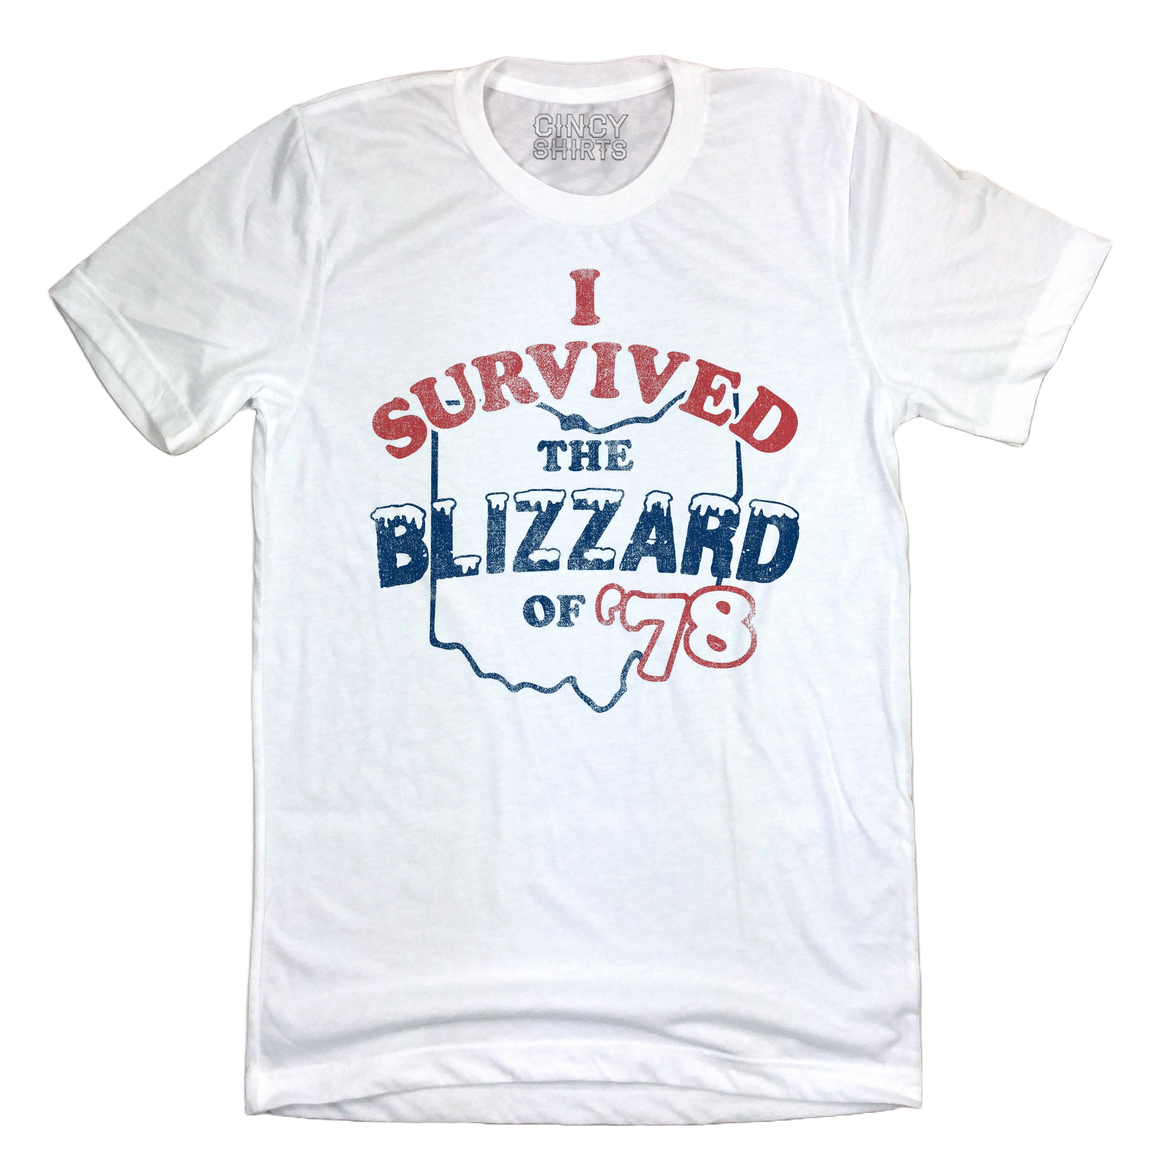 Blizzard of 78' - Cincy Shirts